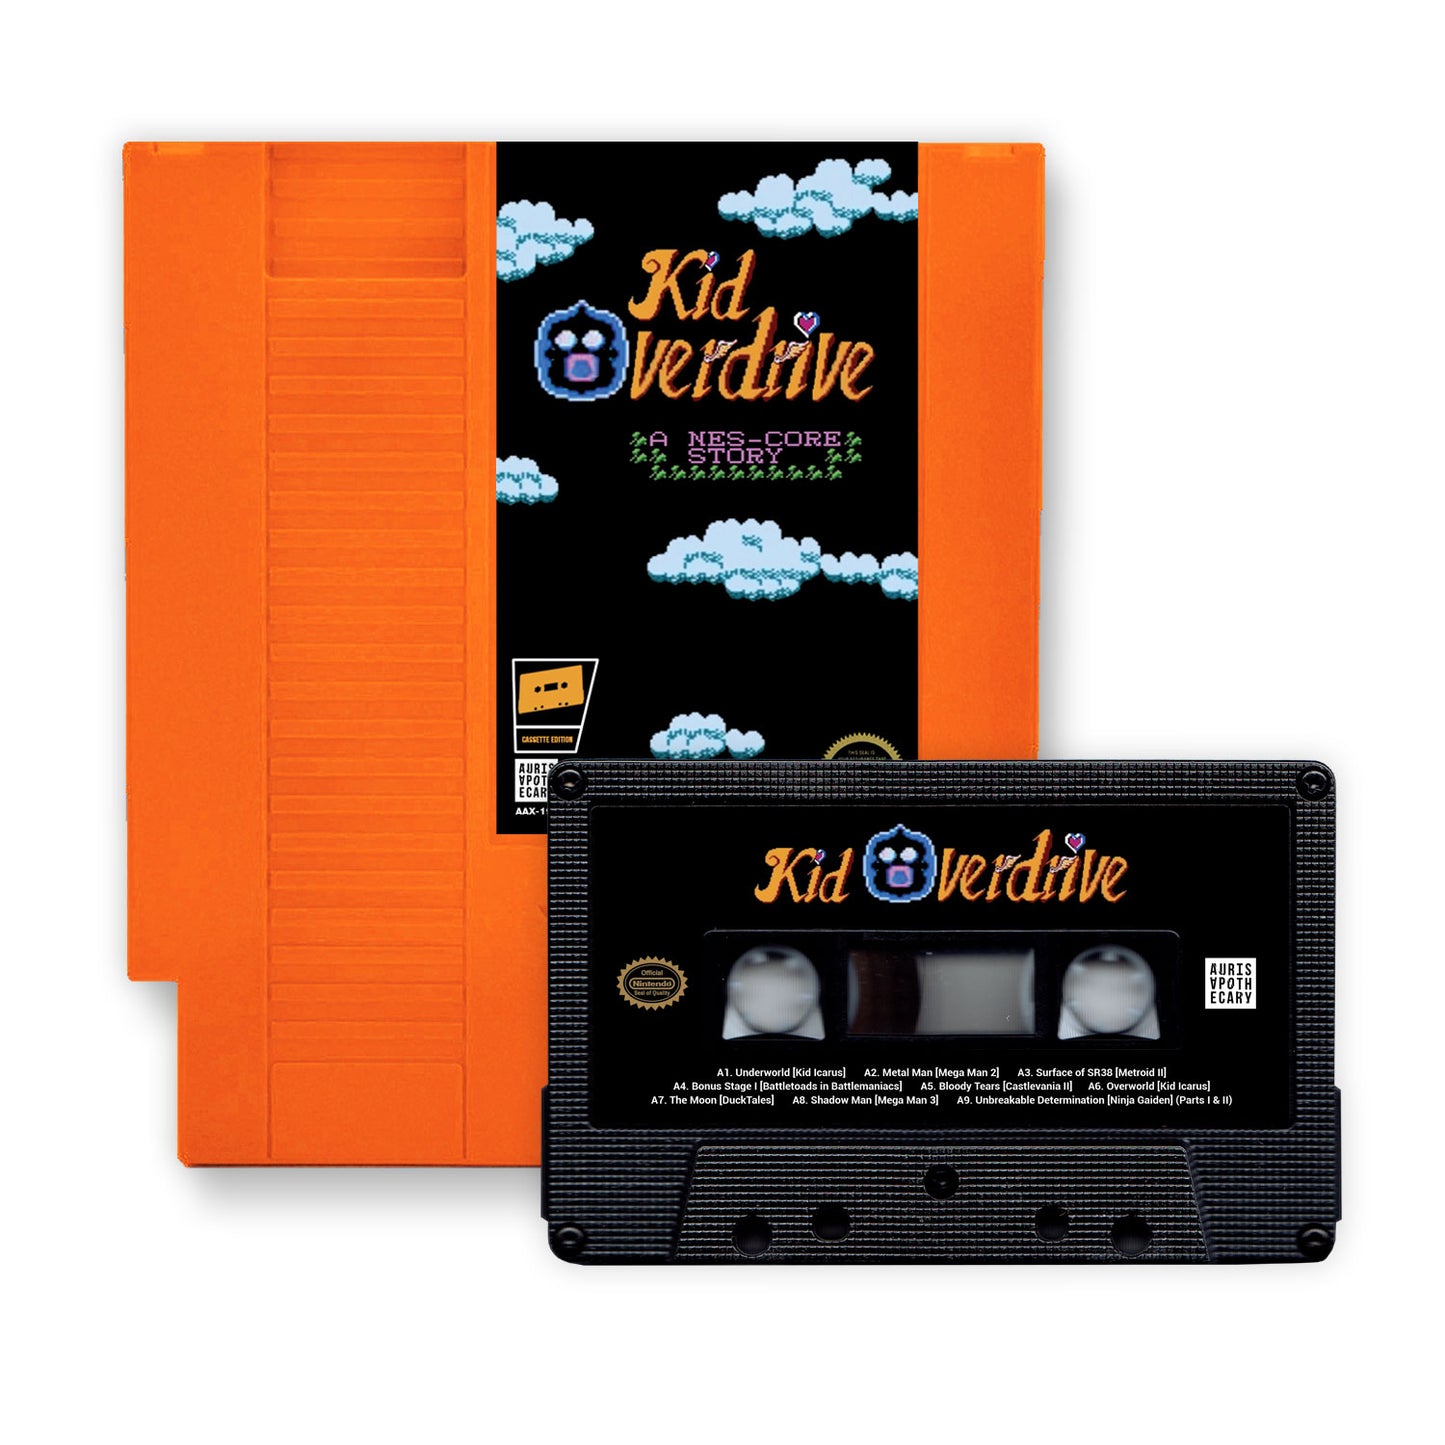 [SOLD OUT] KID OVERDRIVE "A NES-Core Story" Cassette Tape (inside a Nintendo cartridge!)